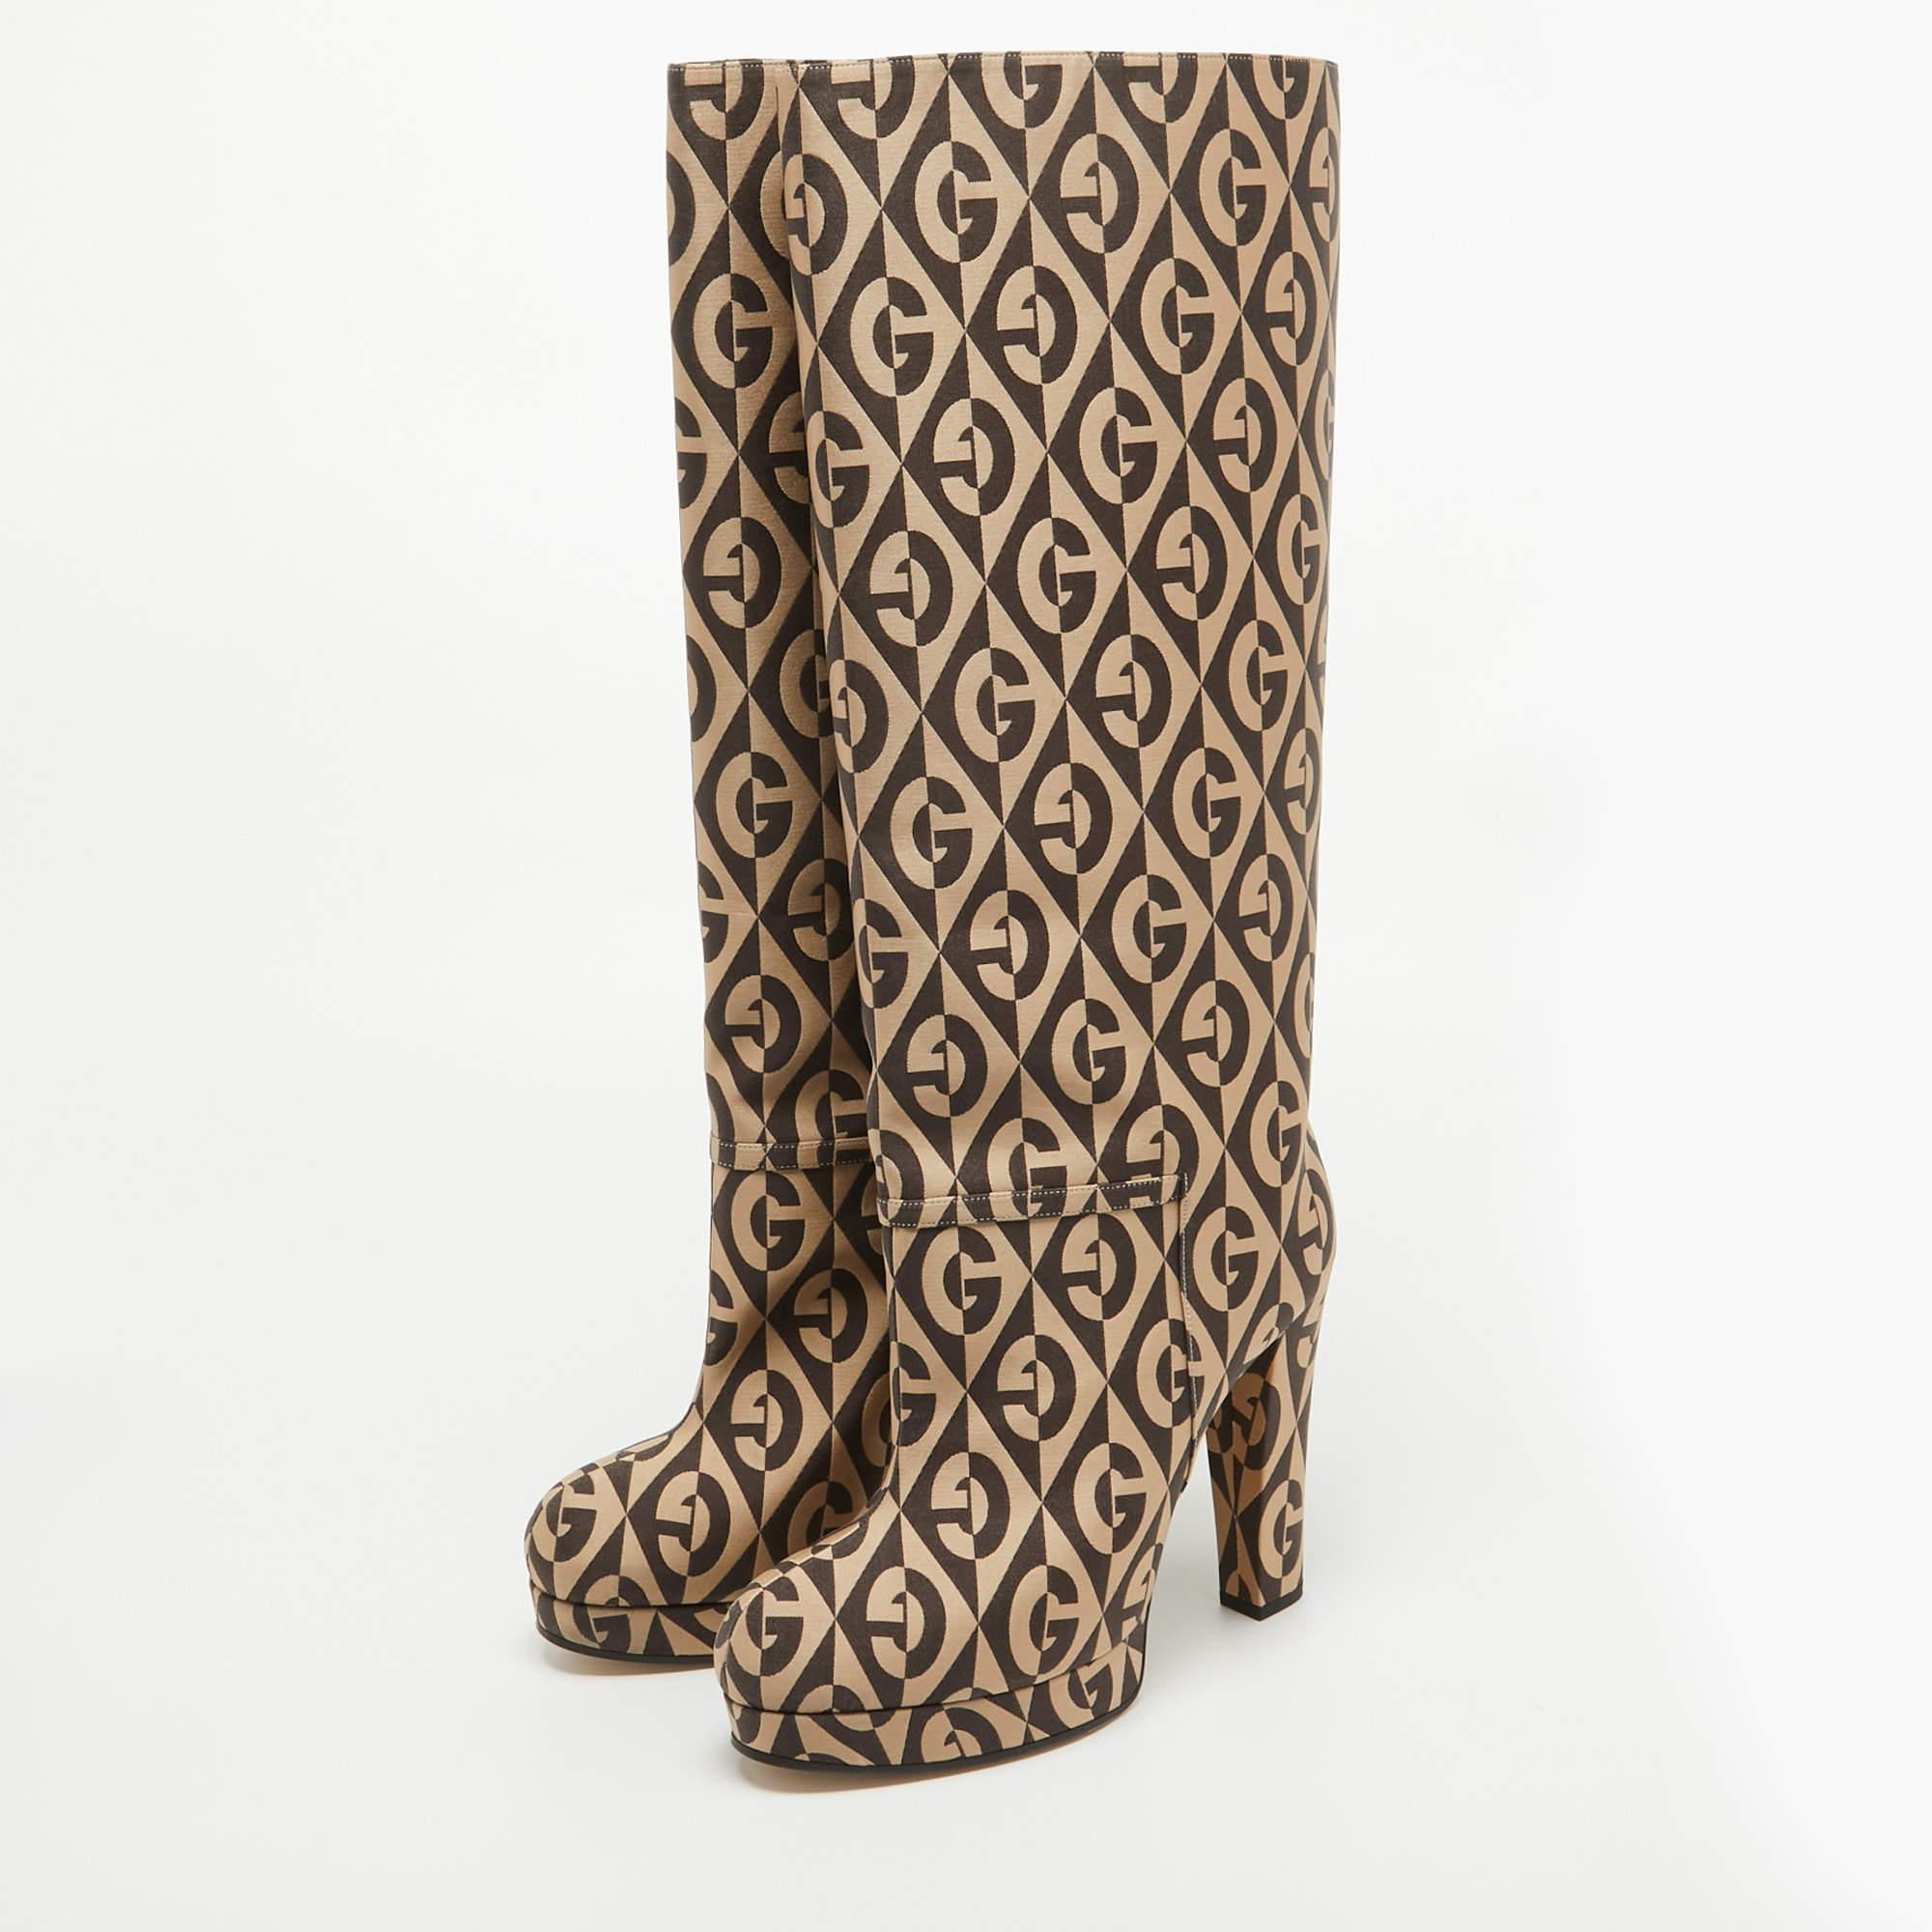 Introducing the exquisite Gucci boot, a harmonious blend of opulence and comfort. Crafted with luxurious beige and brown fabric, adorned with the iconic rhombus pattern, and elevated by a sleek platform heel, these boots epitomize sophistication and